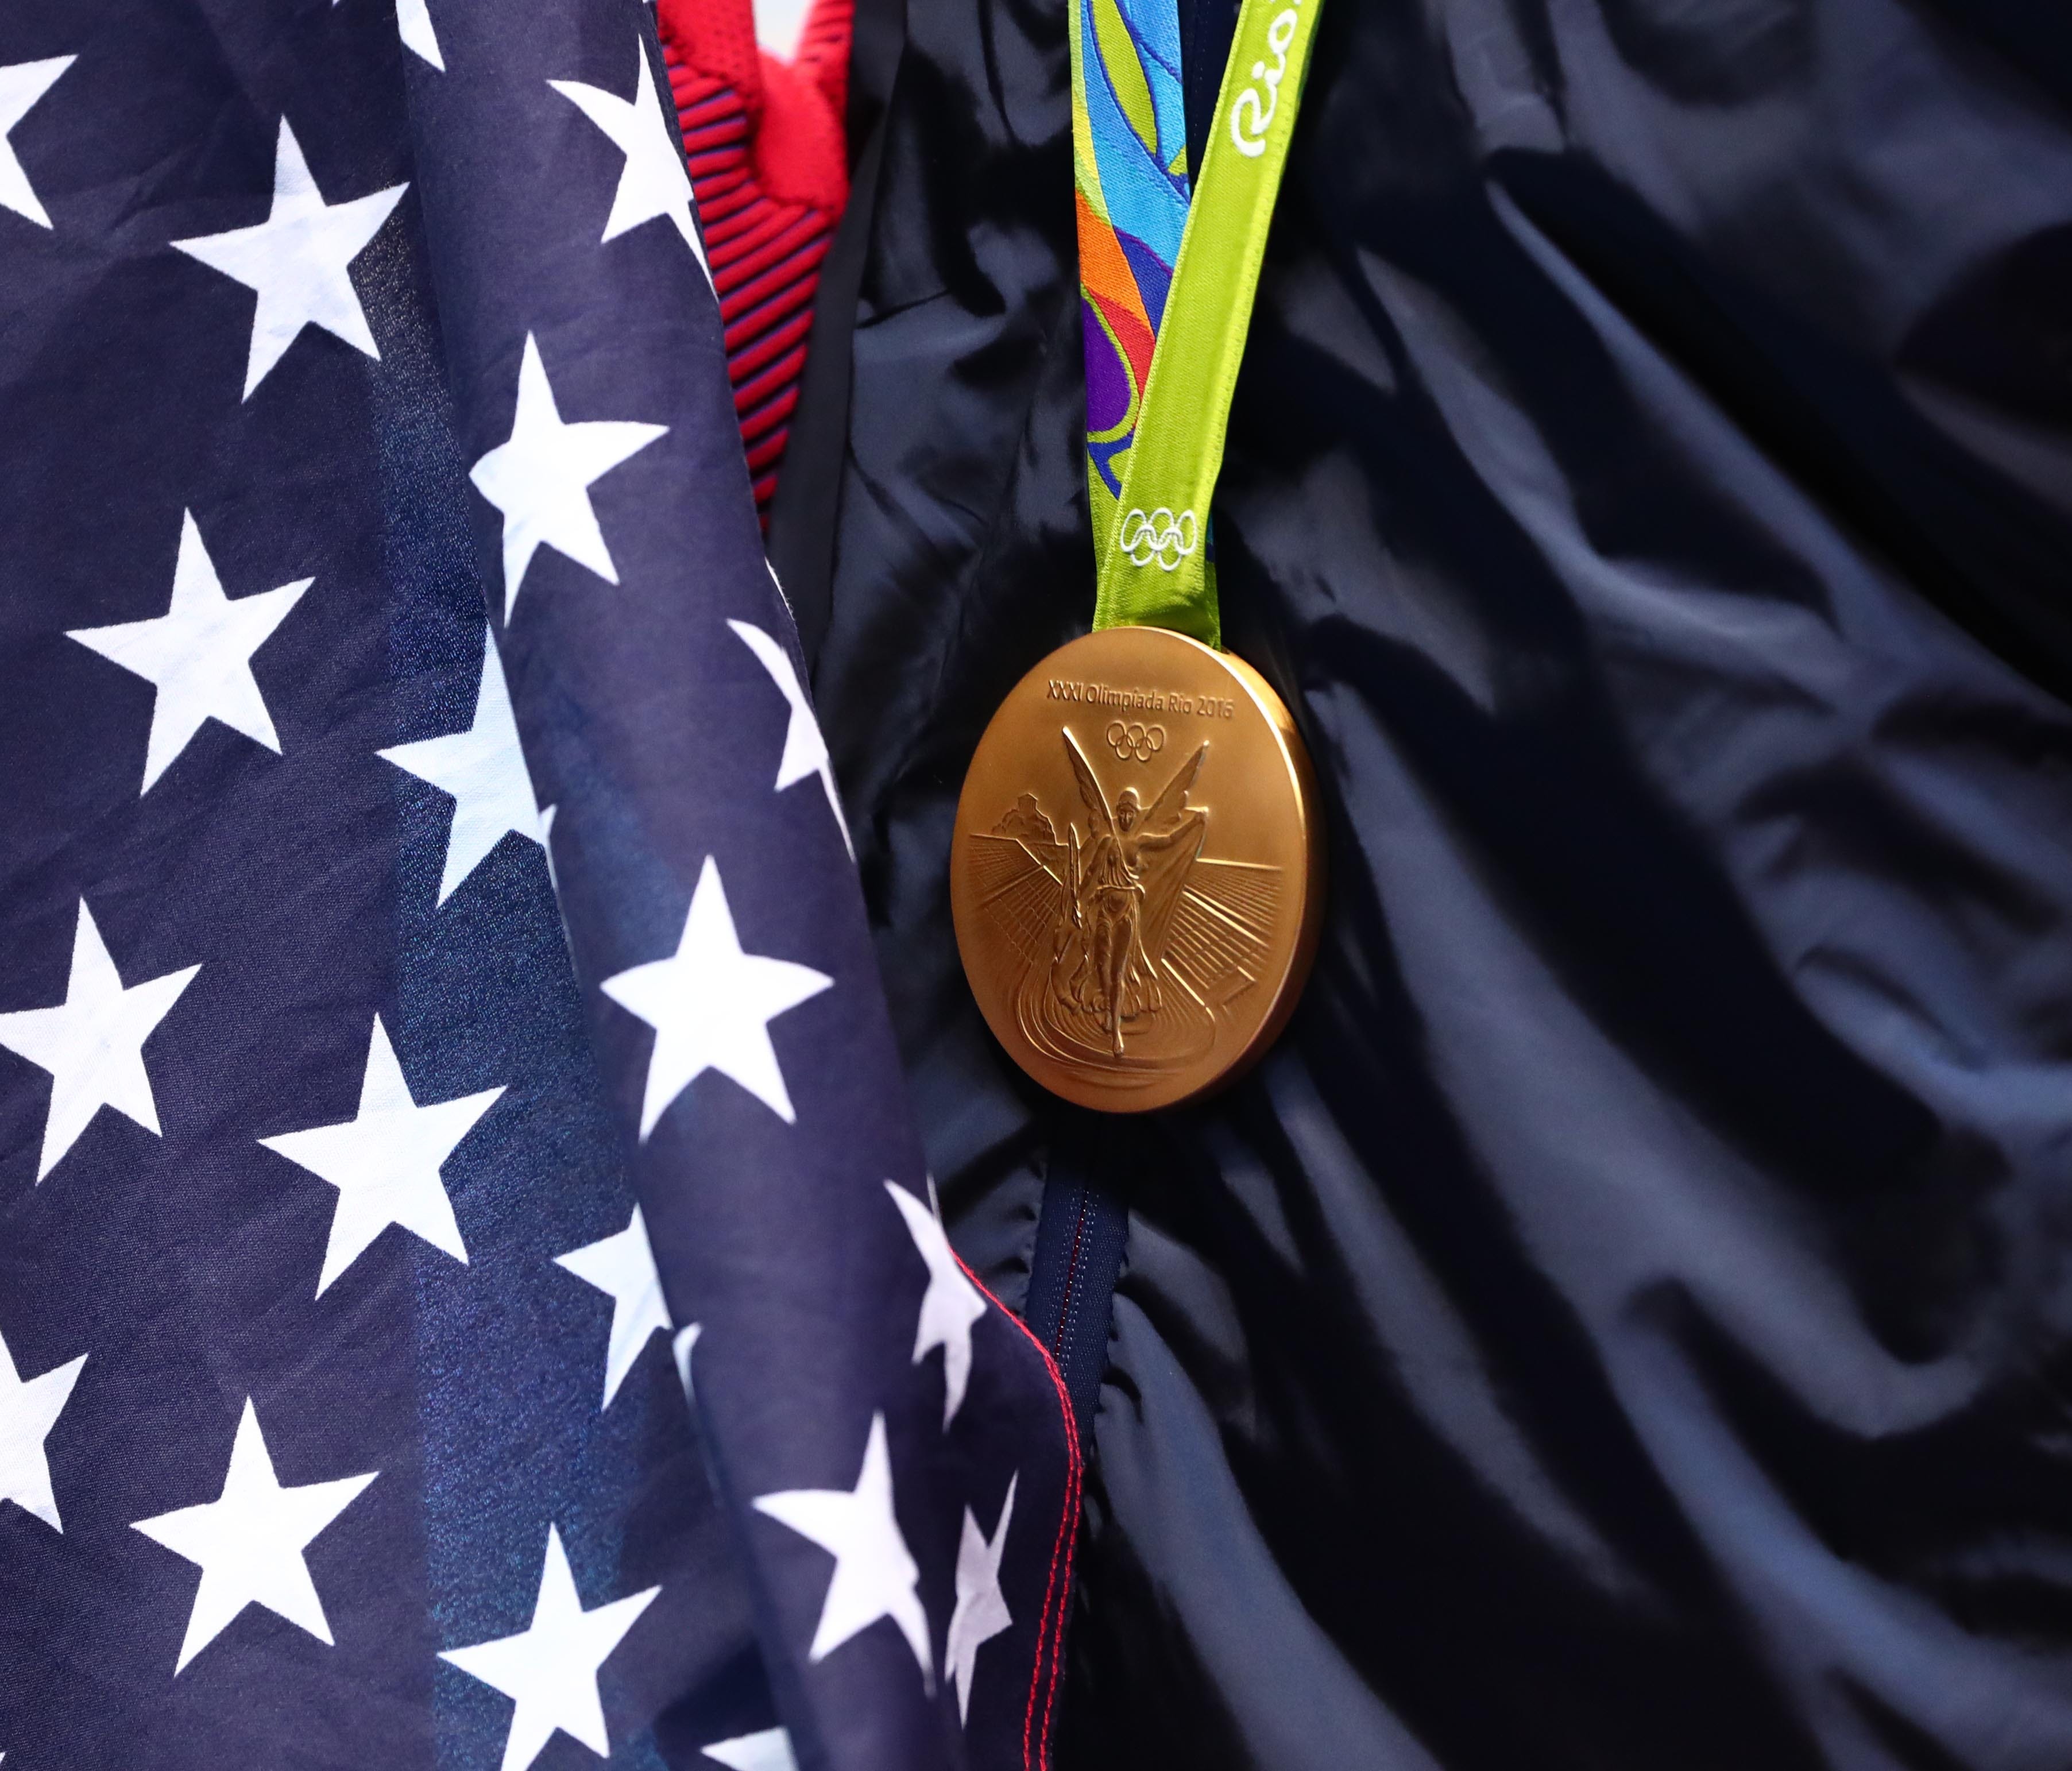 The scandal involving USA Swimming was touched off in April 2010 by a 20/20 report detailing inappropriate relationships between coaches and underage athletes.